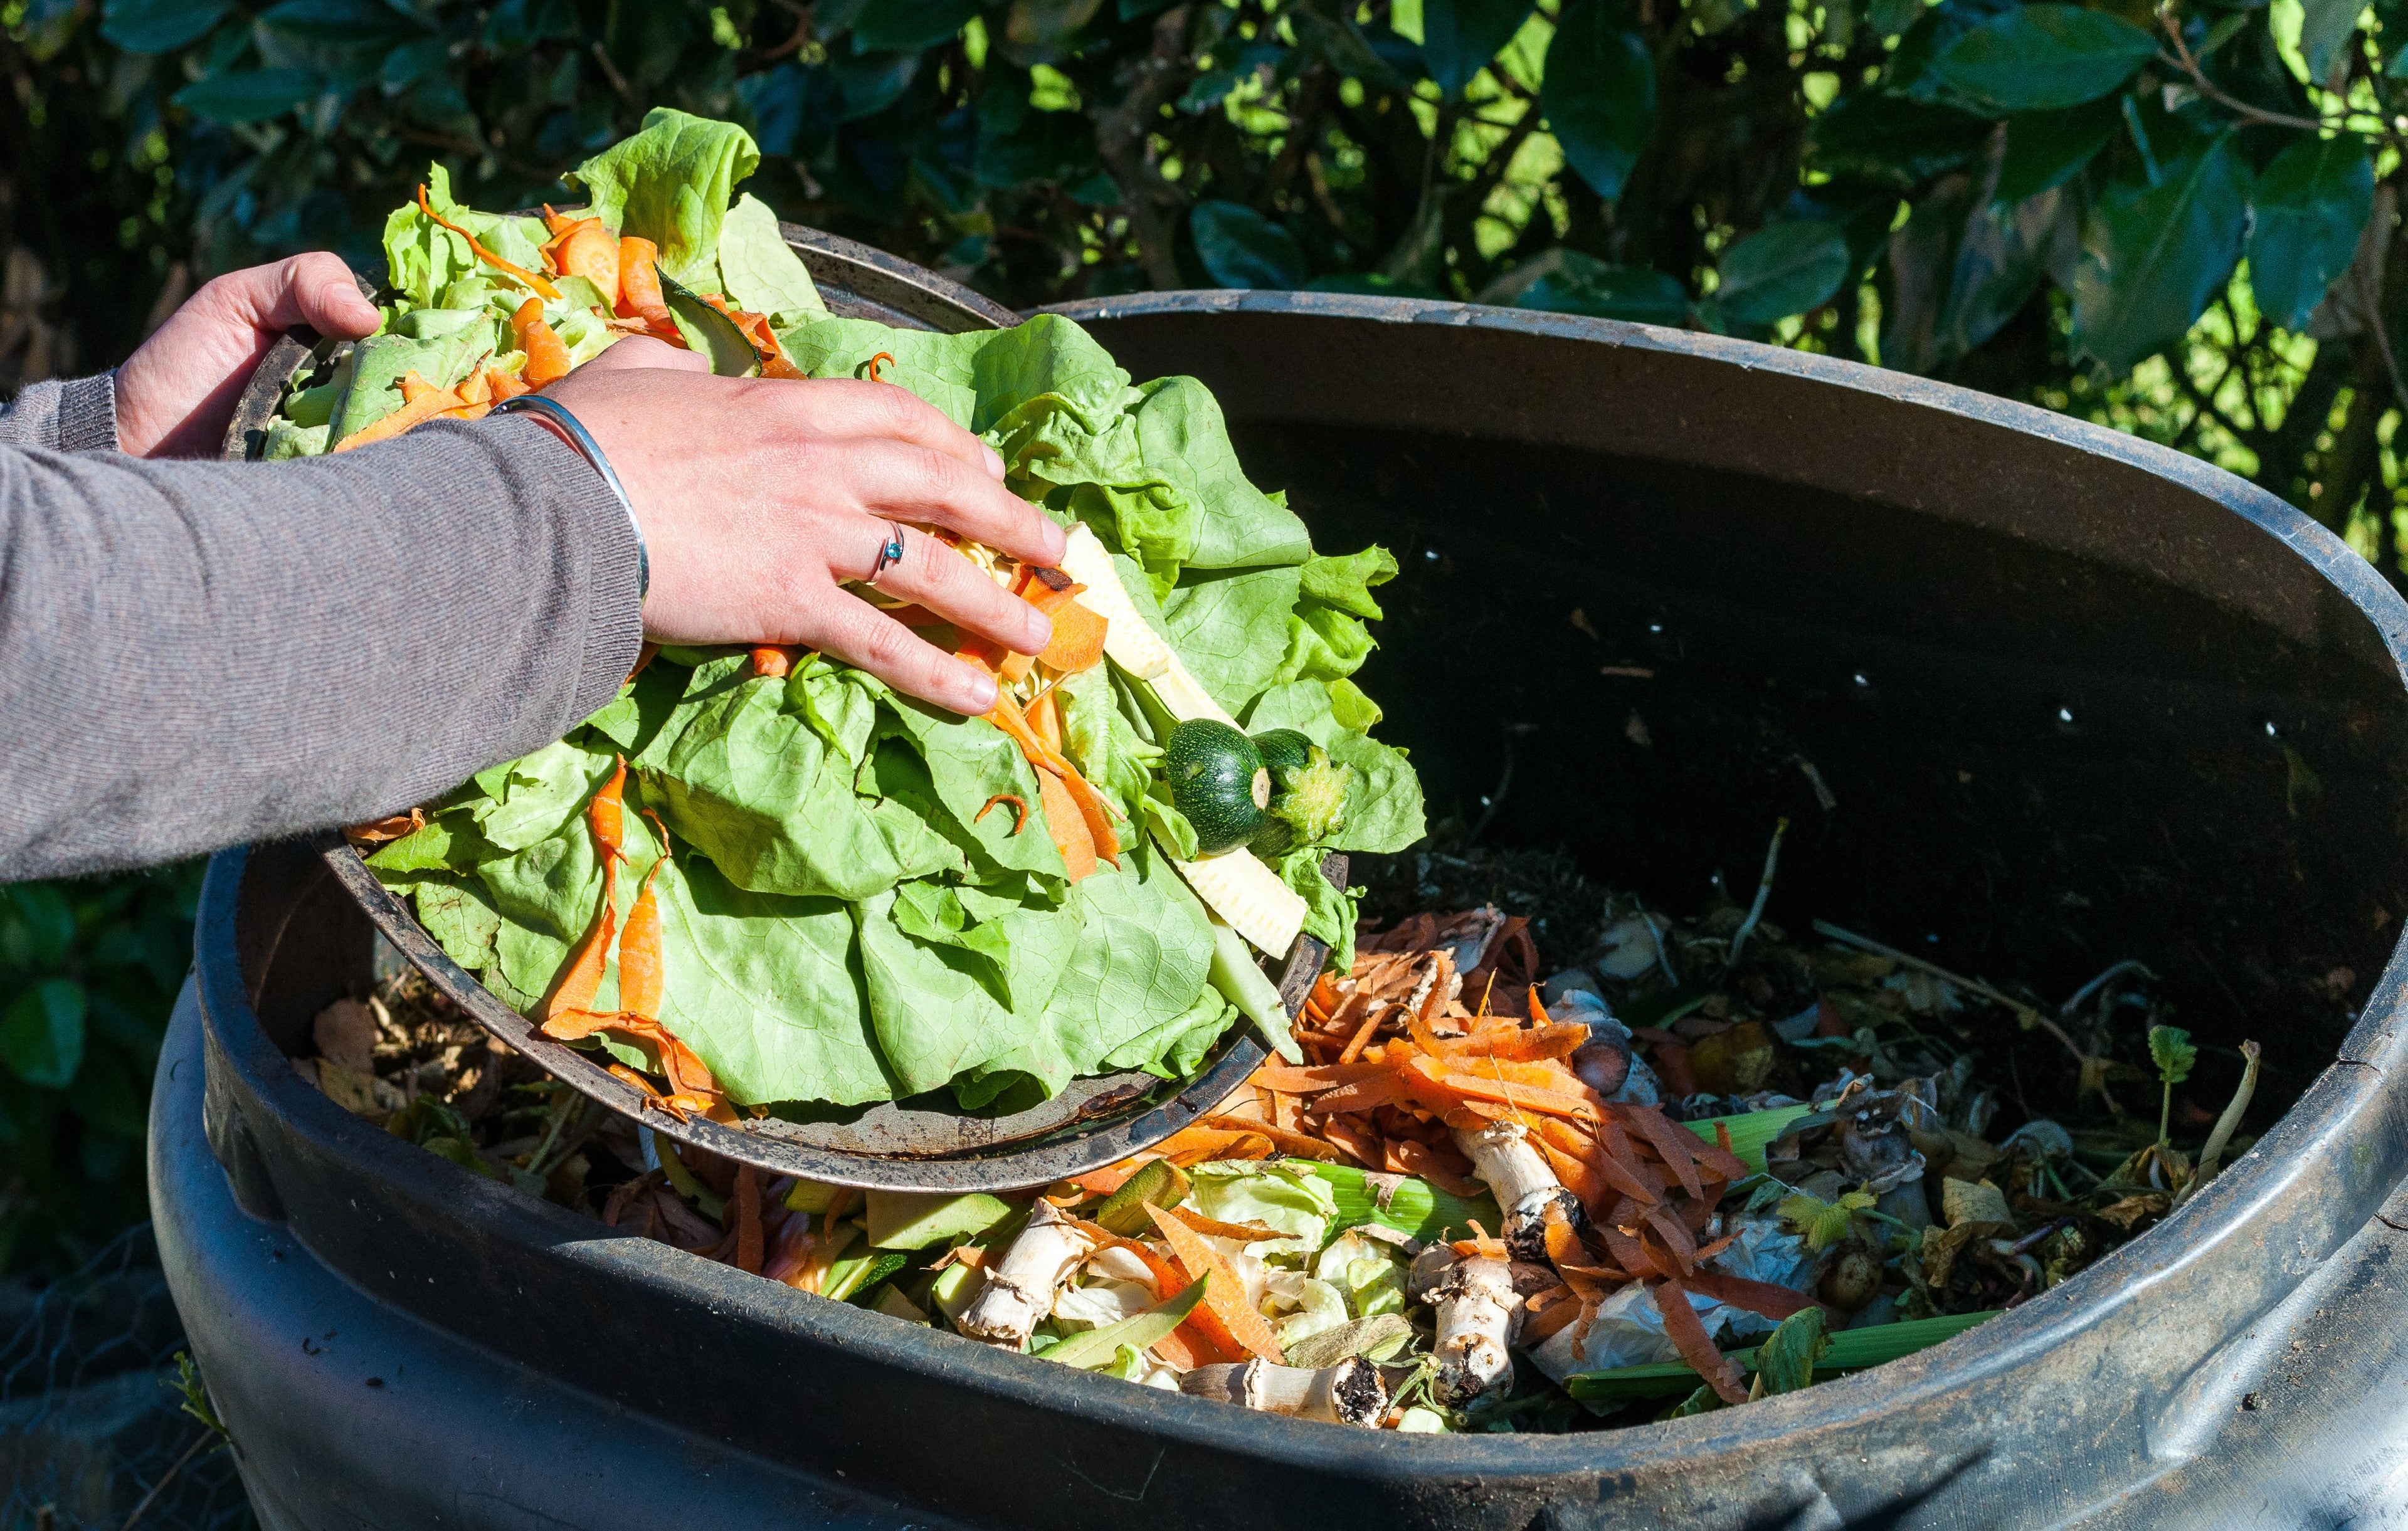 scrapping-food-scraps-into-an-outside-compost-bin